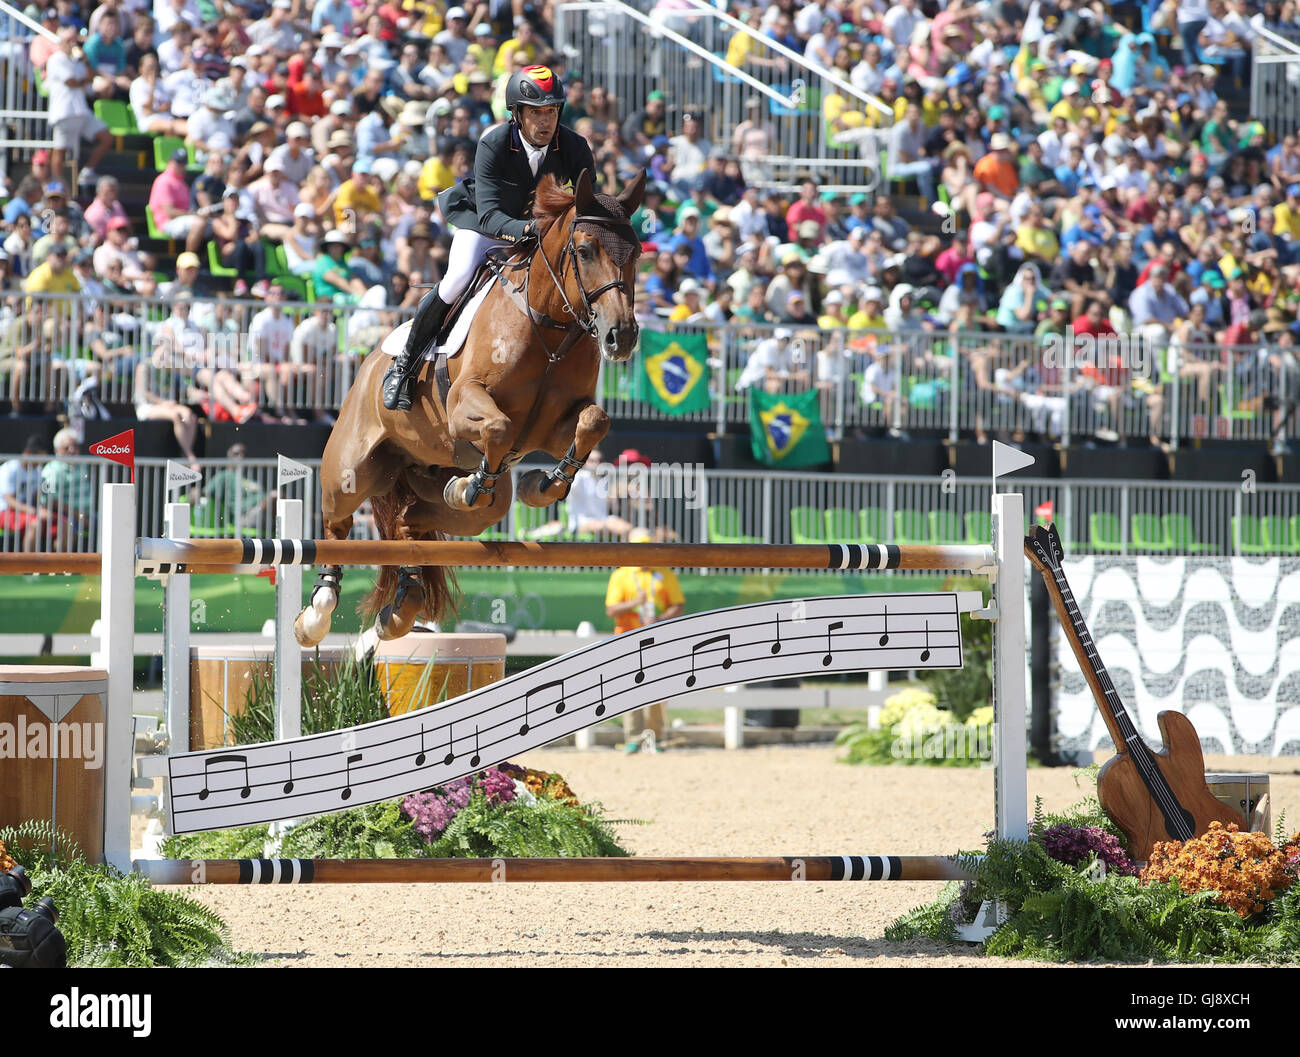 Rio de Janeiro, Brazil. 14th Aug, 2016. Manuel Fernandez Saro of Spain on horse U Watch clears an obstacle during the Jumping Team 1st Qualifier of the Equestrian competition at the Olympic Equestrian Centre during the Rio 2016 Olympic Games in Rio de Janeiro, Brazil, 14 August 2016. Photo: Friso Gentsch/dpa/Alamy Live News Stock Photo